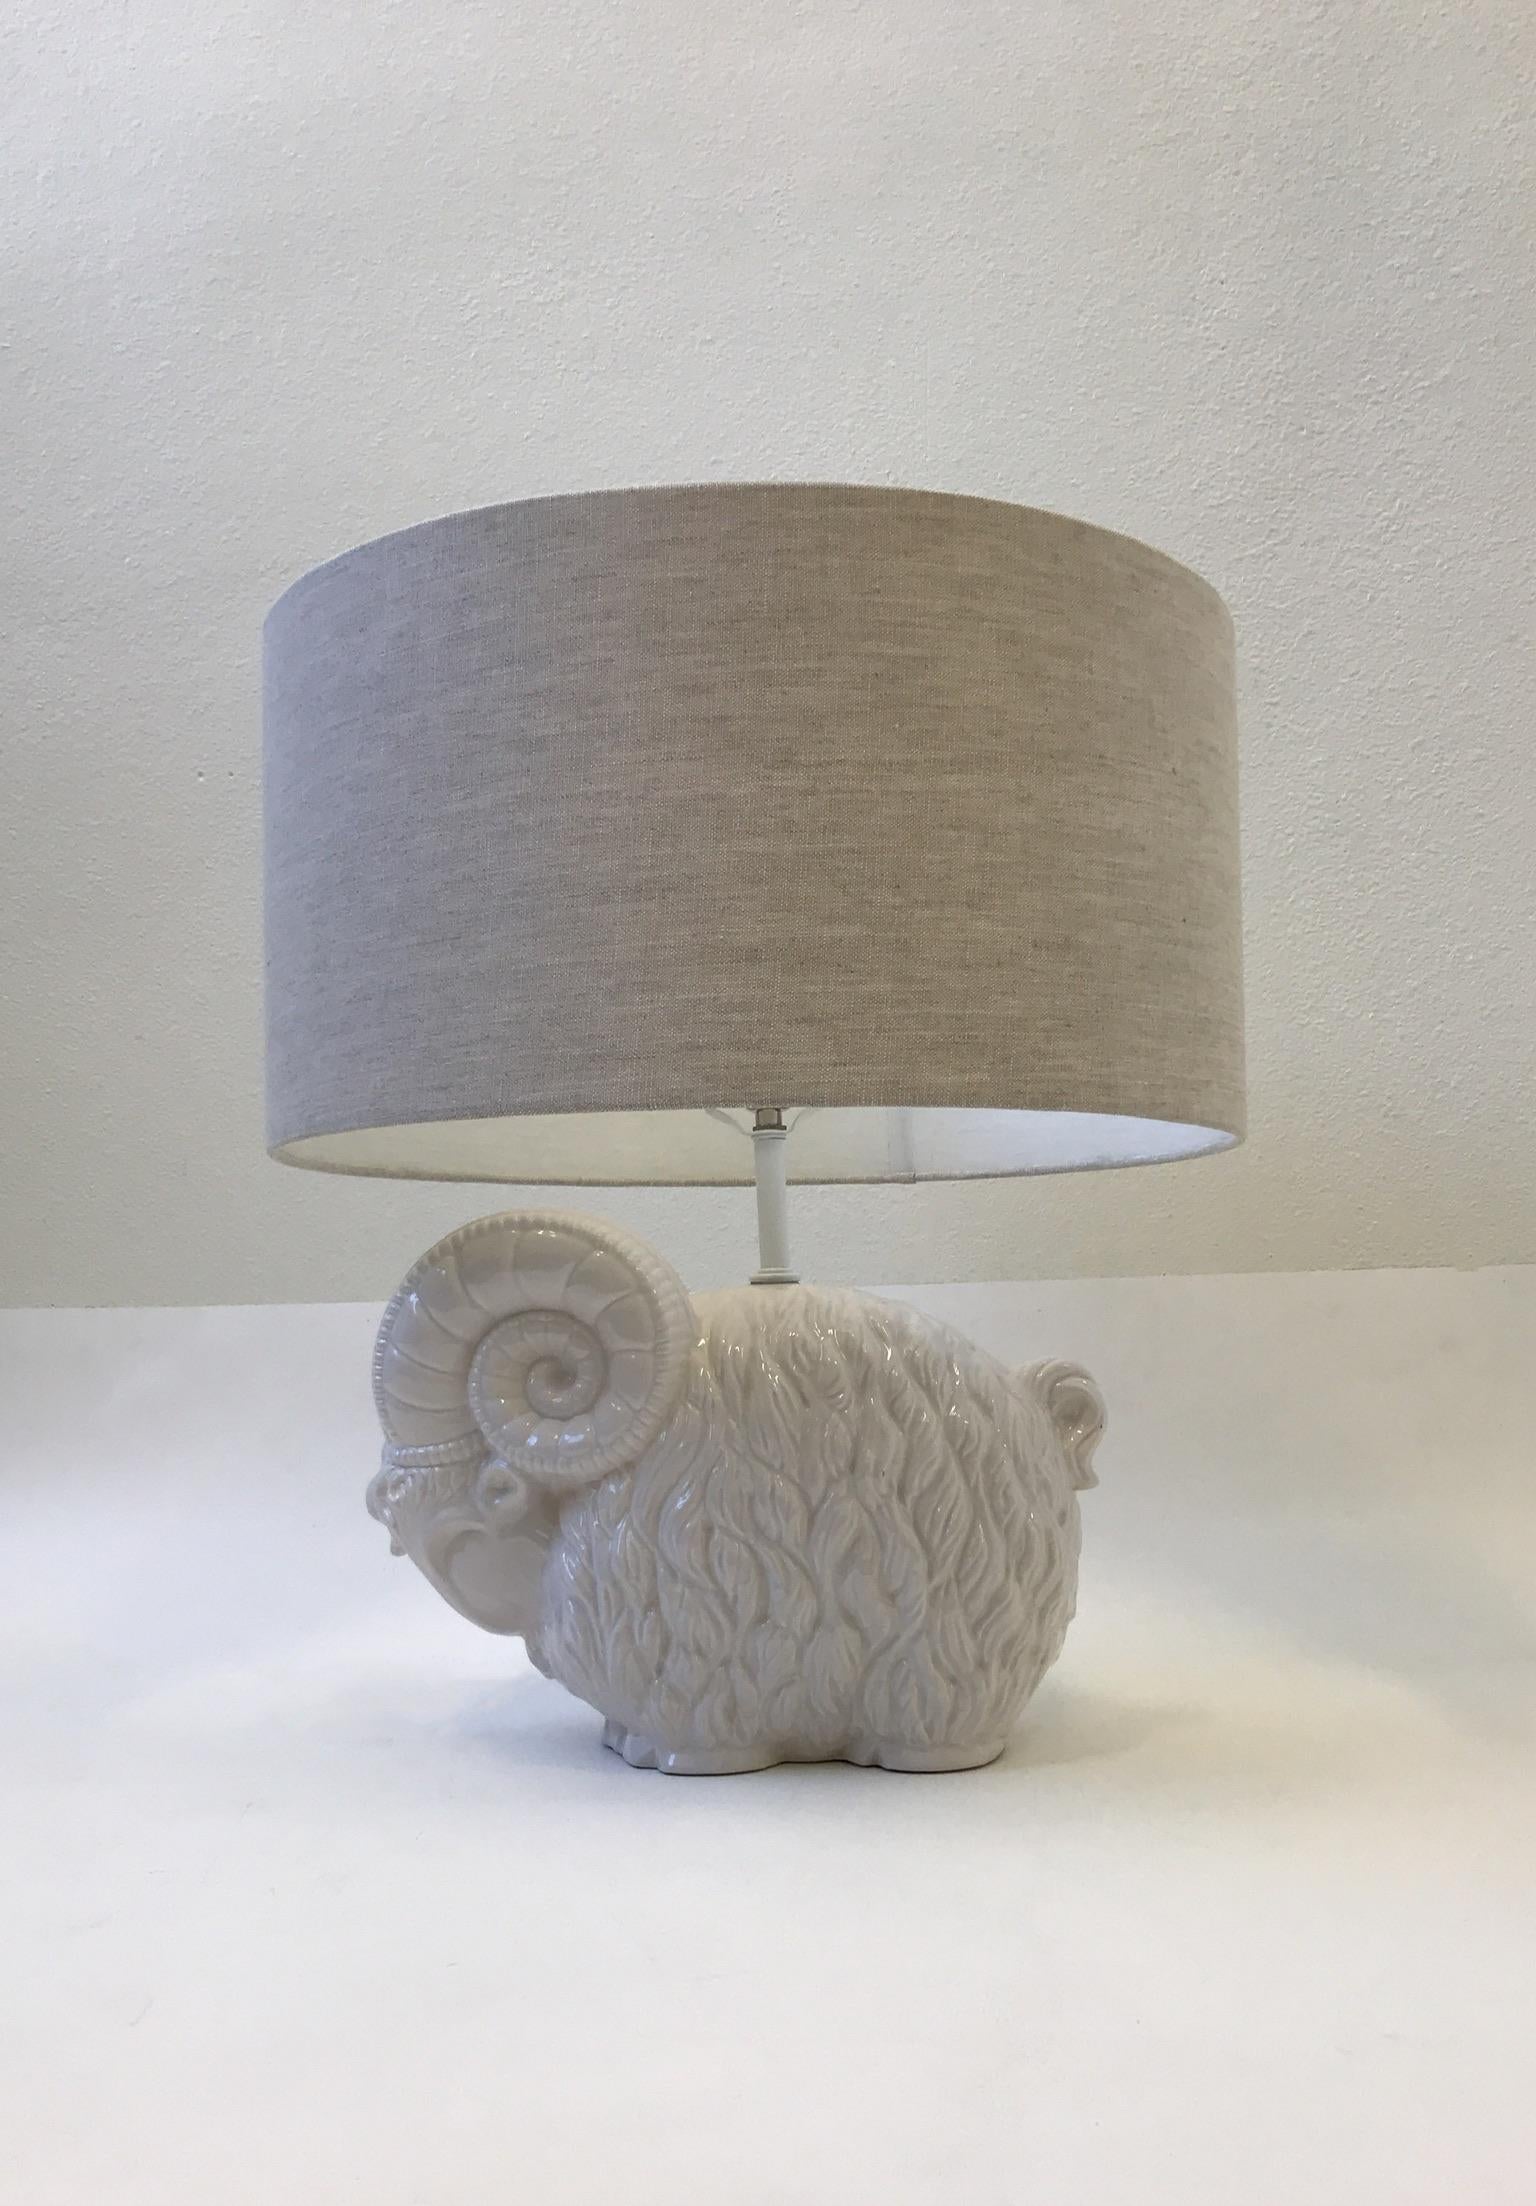 A beautiful 1970’s white ceramic table lamp designed by Hager. The lamp has been newly rewired with new polish nickel socket and new oatmeal linen shade. 
Dim: Overall Dimensions- 22.5” high 20” diameter. 
 Just the Ram- 16” wide 11” high 7” deep.